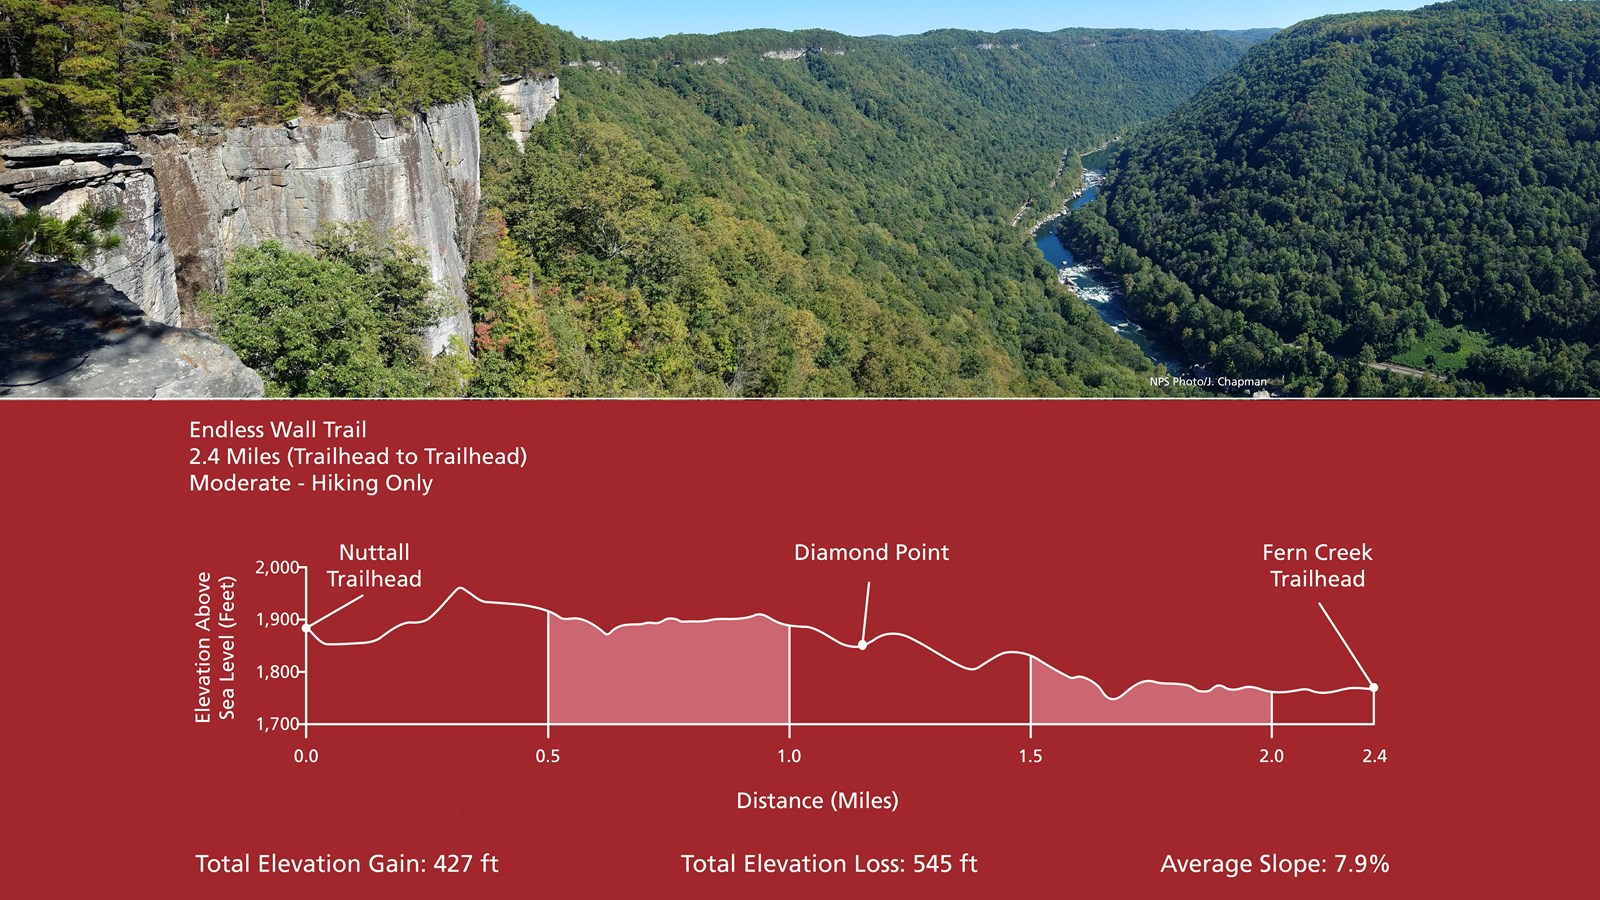 View of a river in a deep gorge and a graphic showing the elevation change along the trail